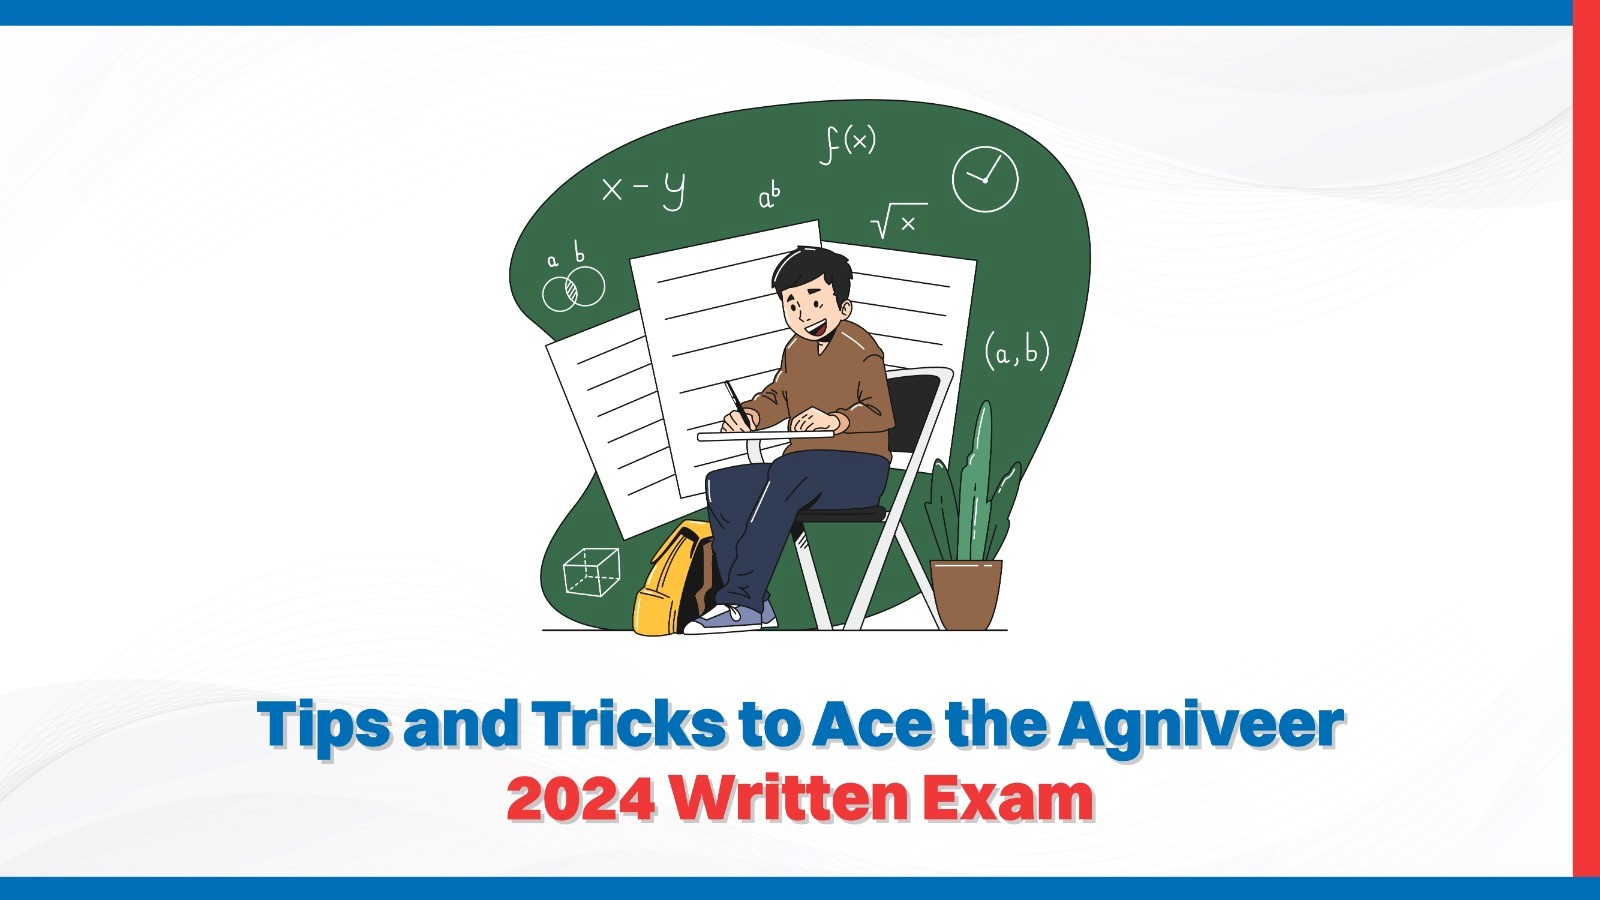 Tips and Tricks to Ace the Agniveer 2024 Written Exam